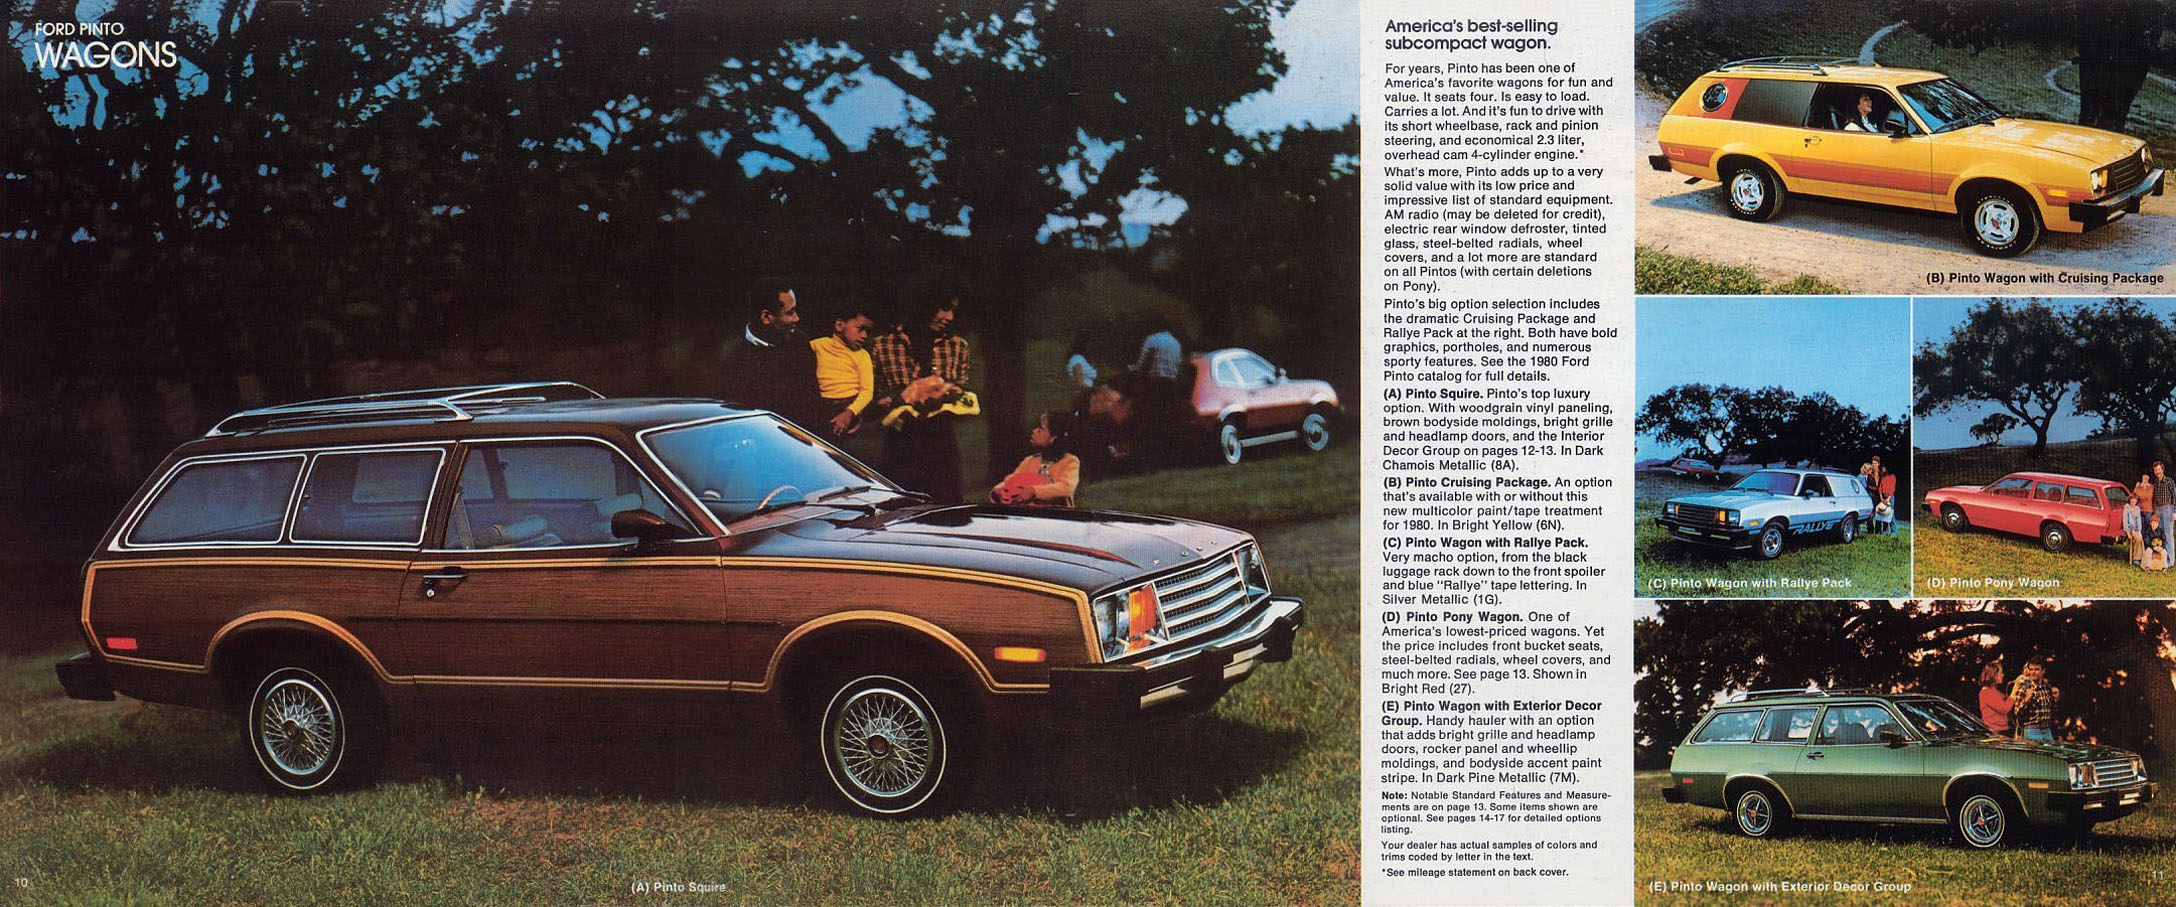 1980 Ford Wagons-06